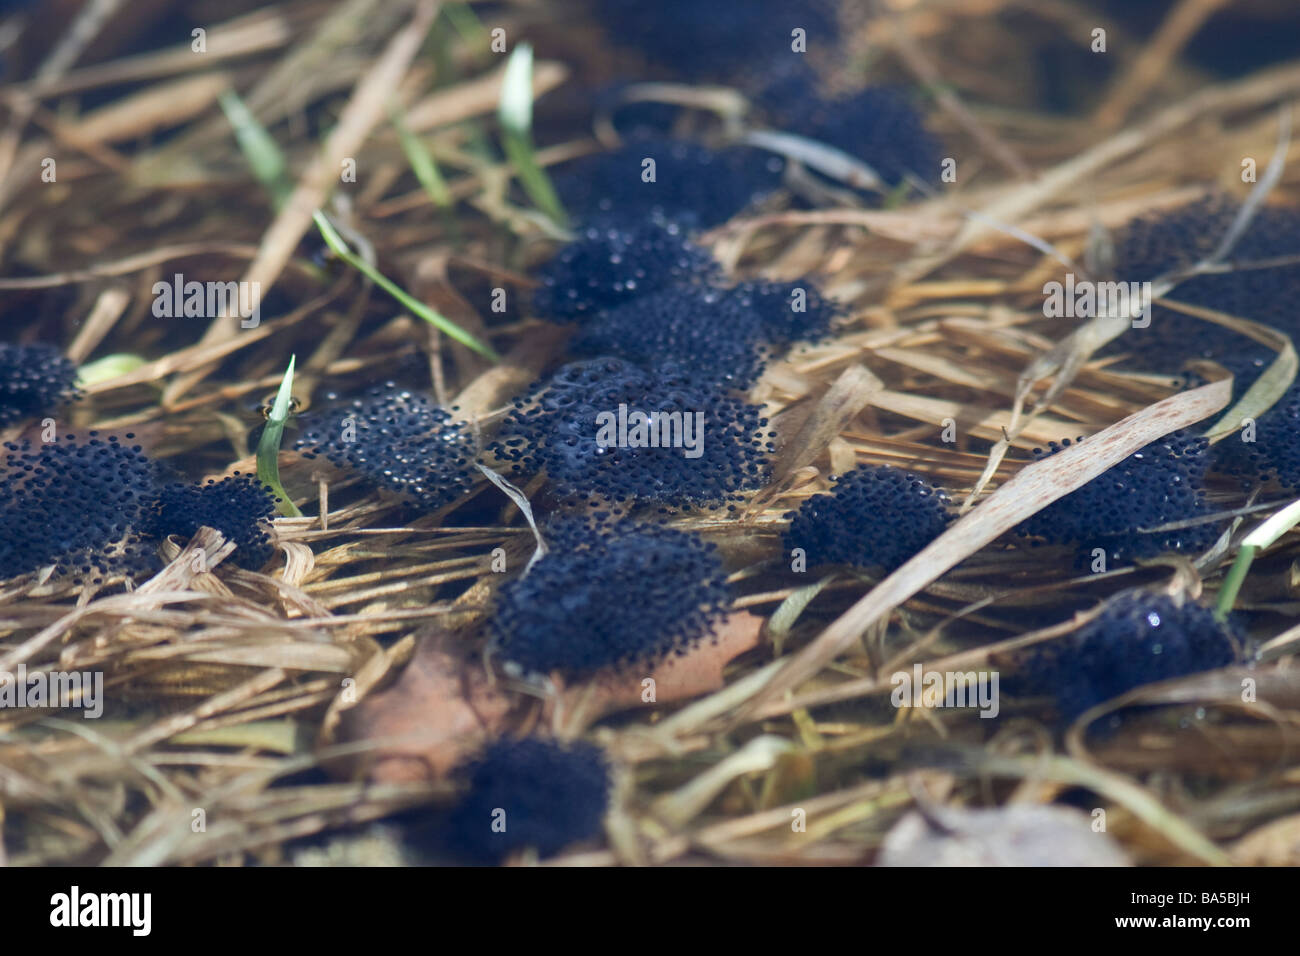 Frog eggs incubating in a local pond. Stock Photo